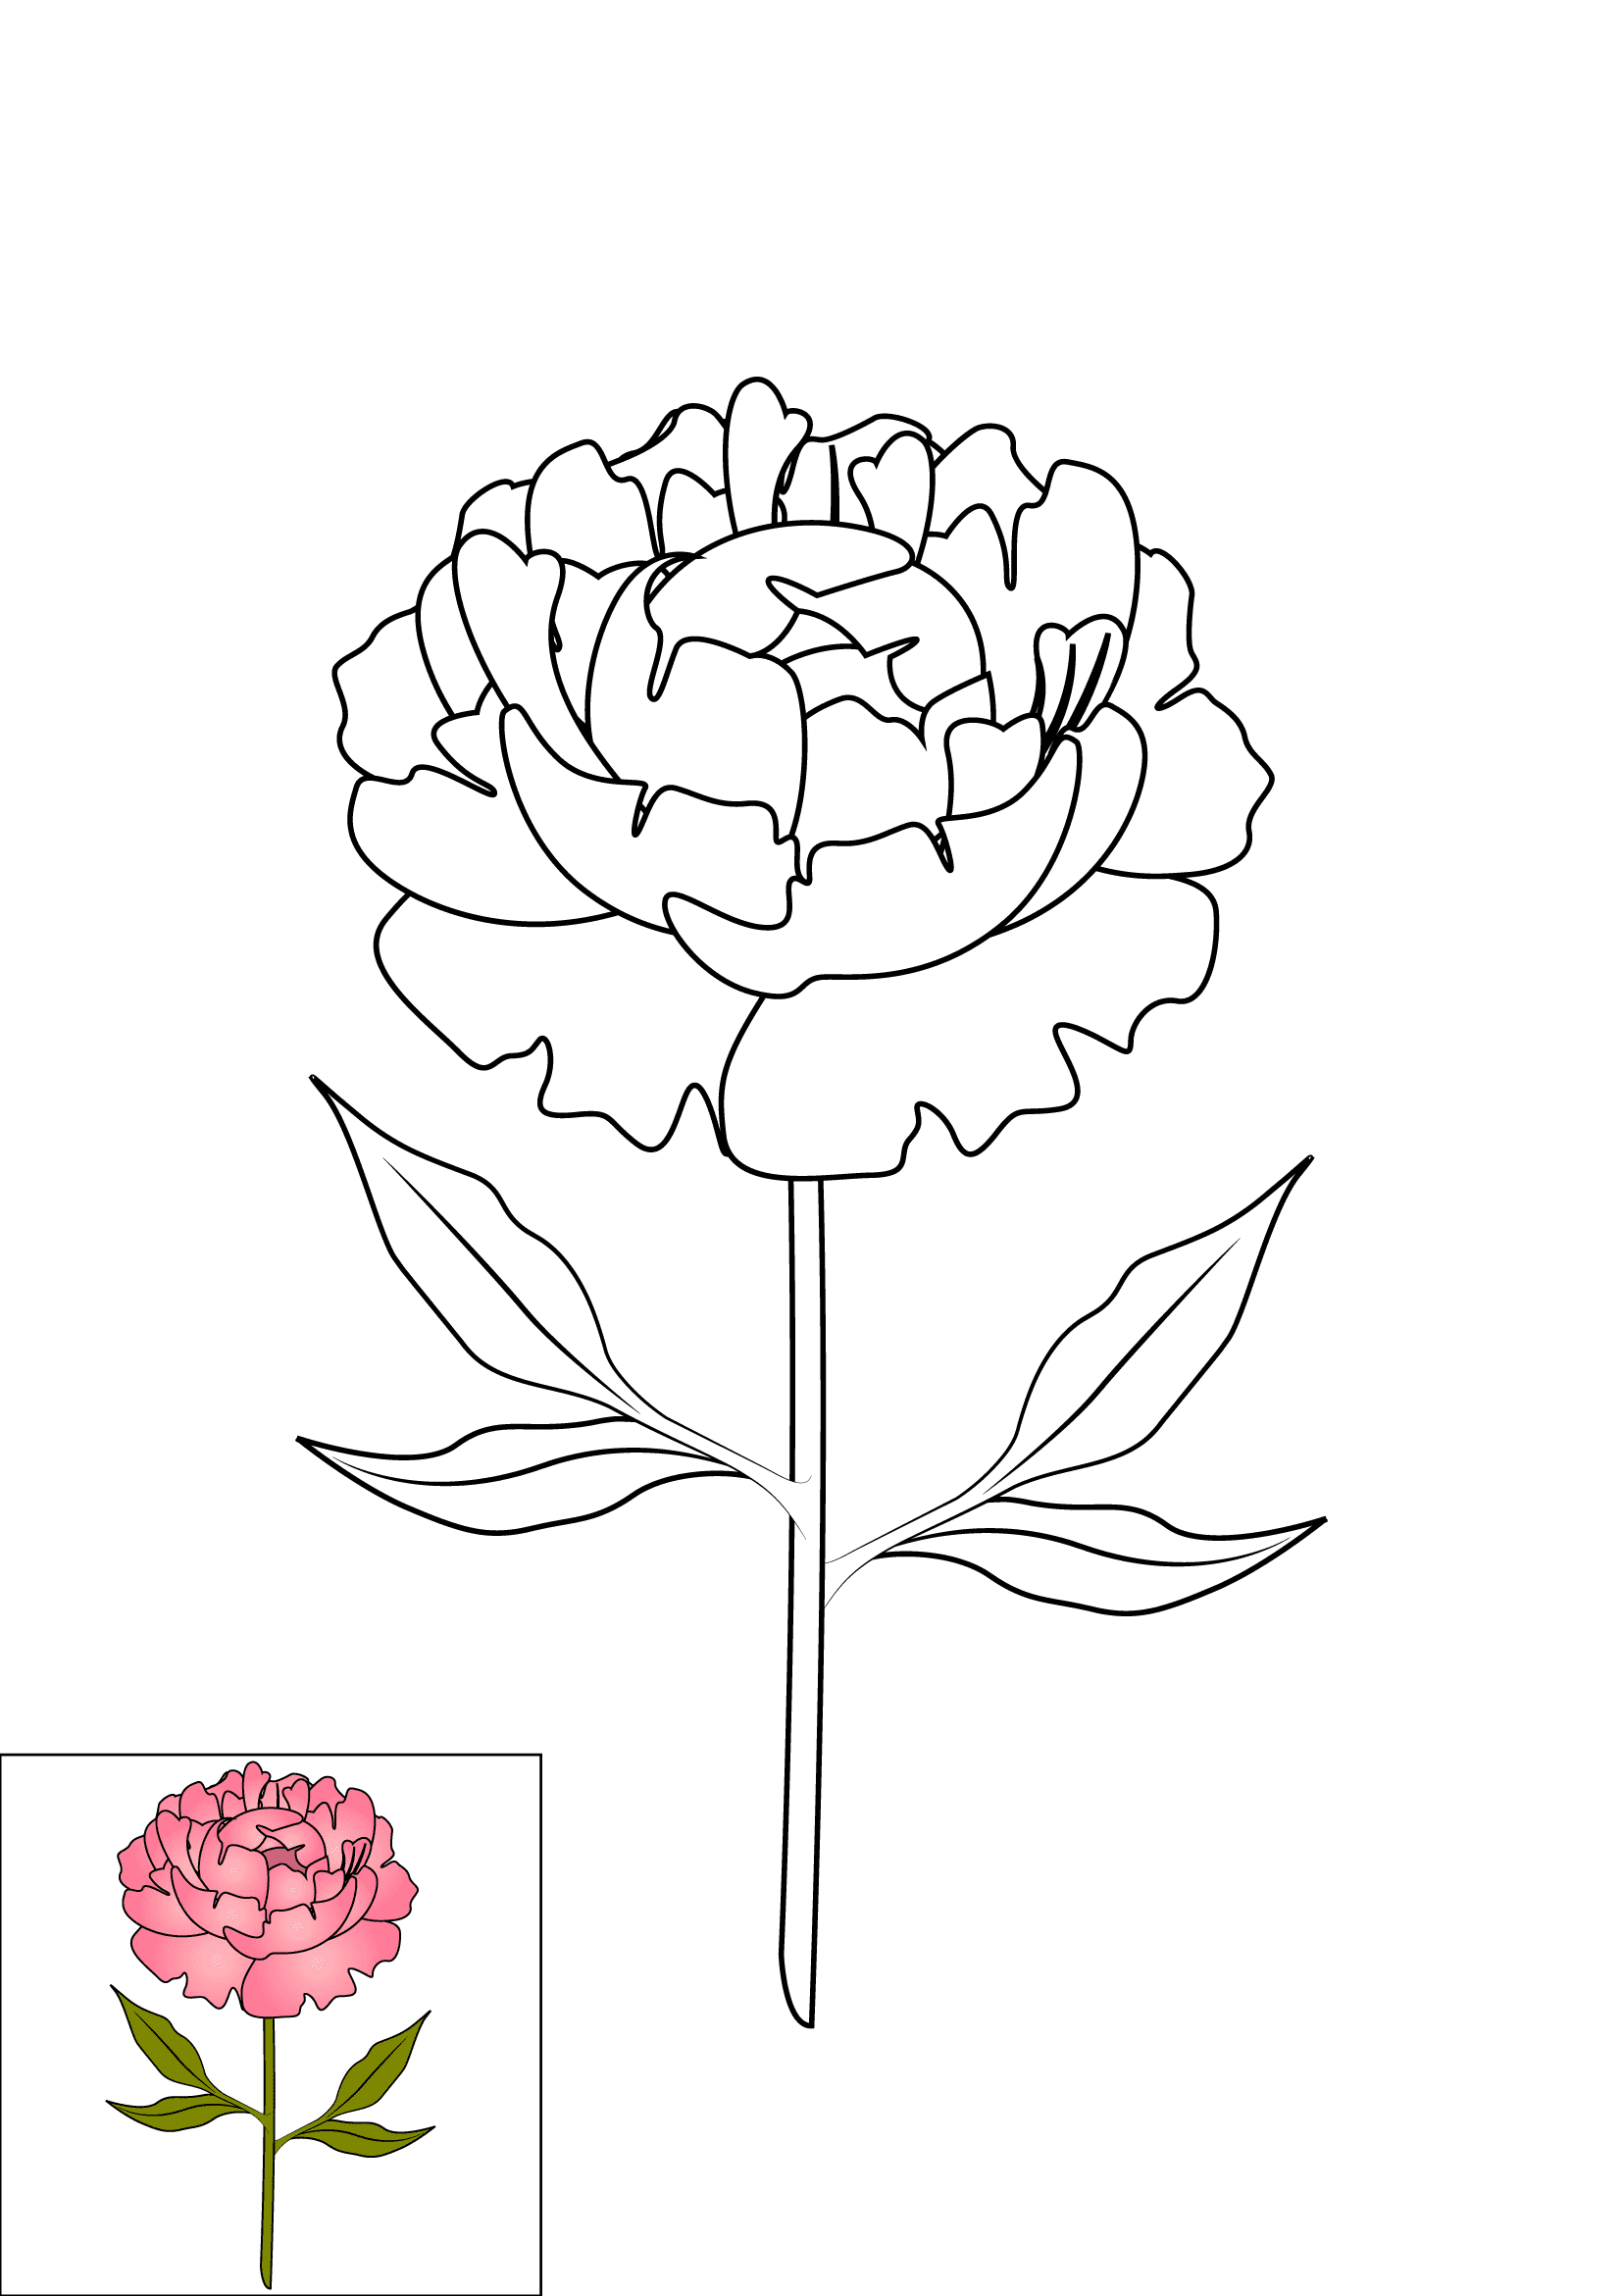 How to Draw Peonies Step by Step Printable Color